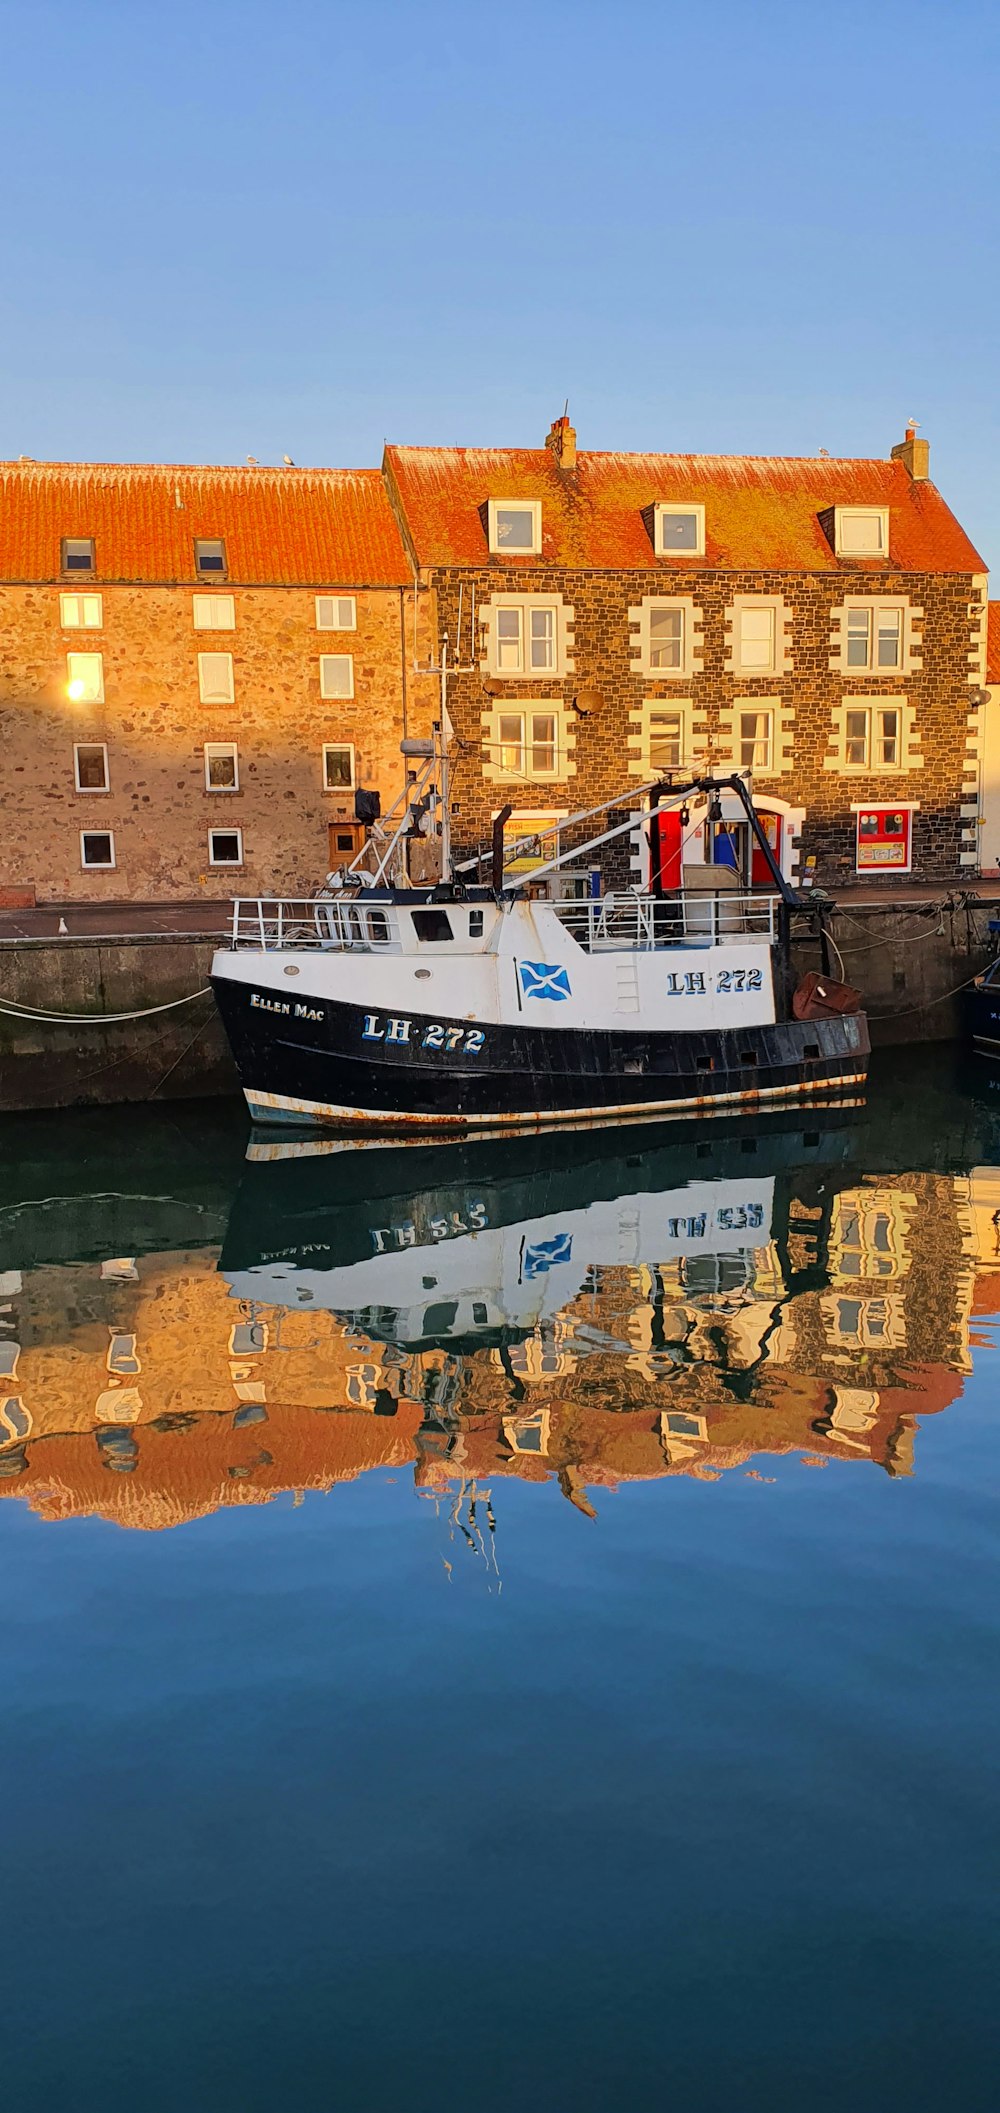 a boat is docked in the water next to a brick building